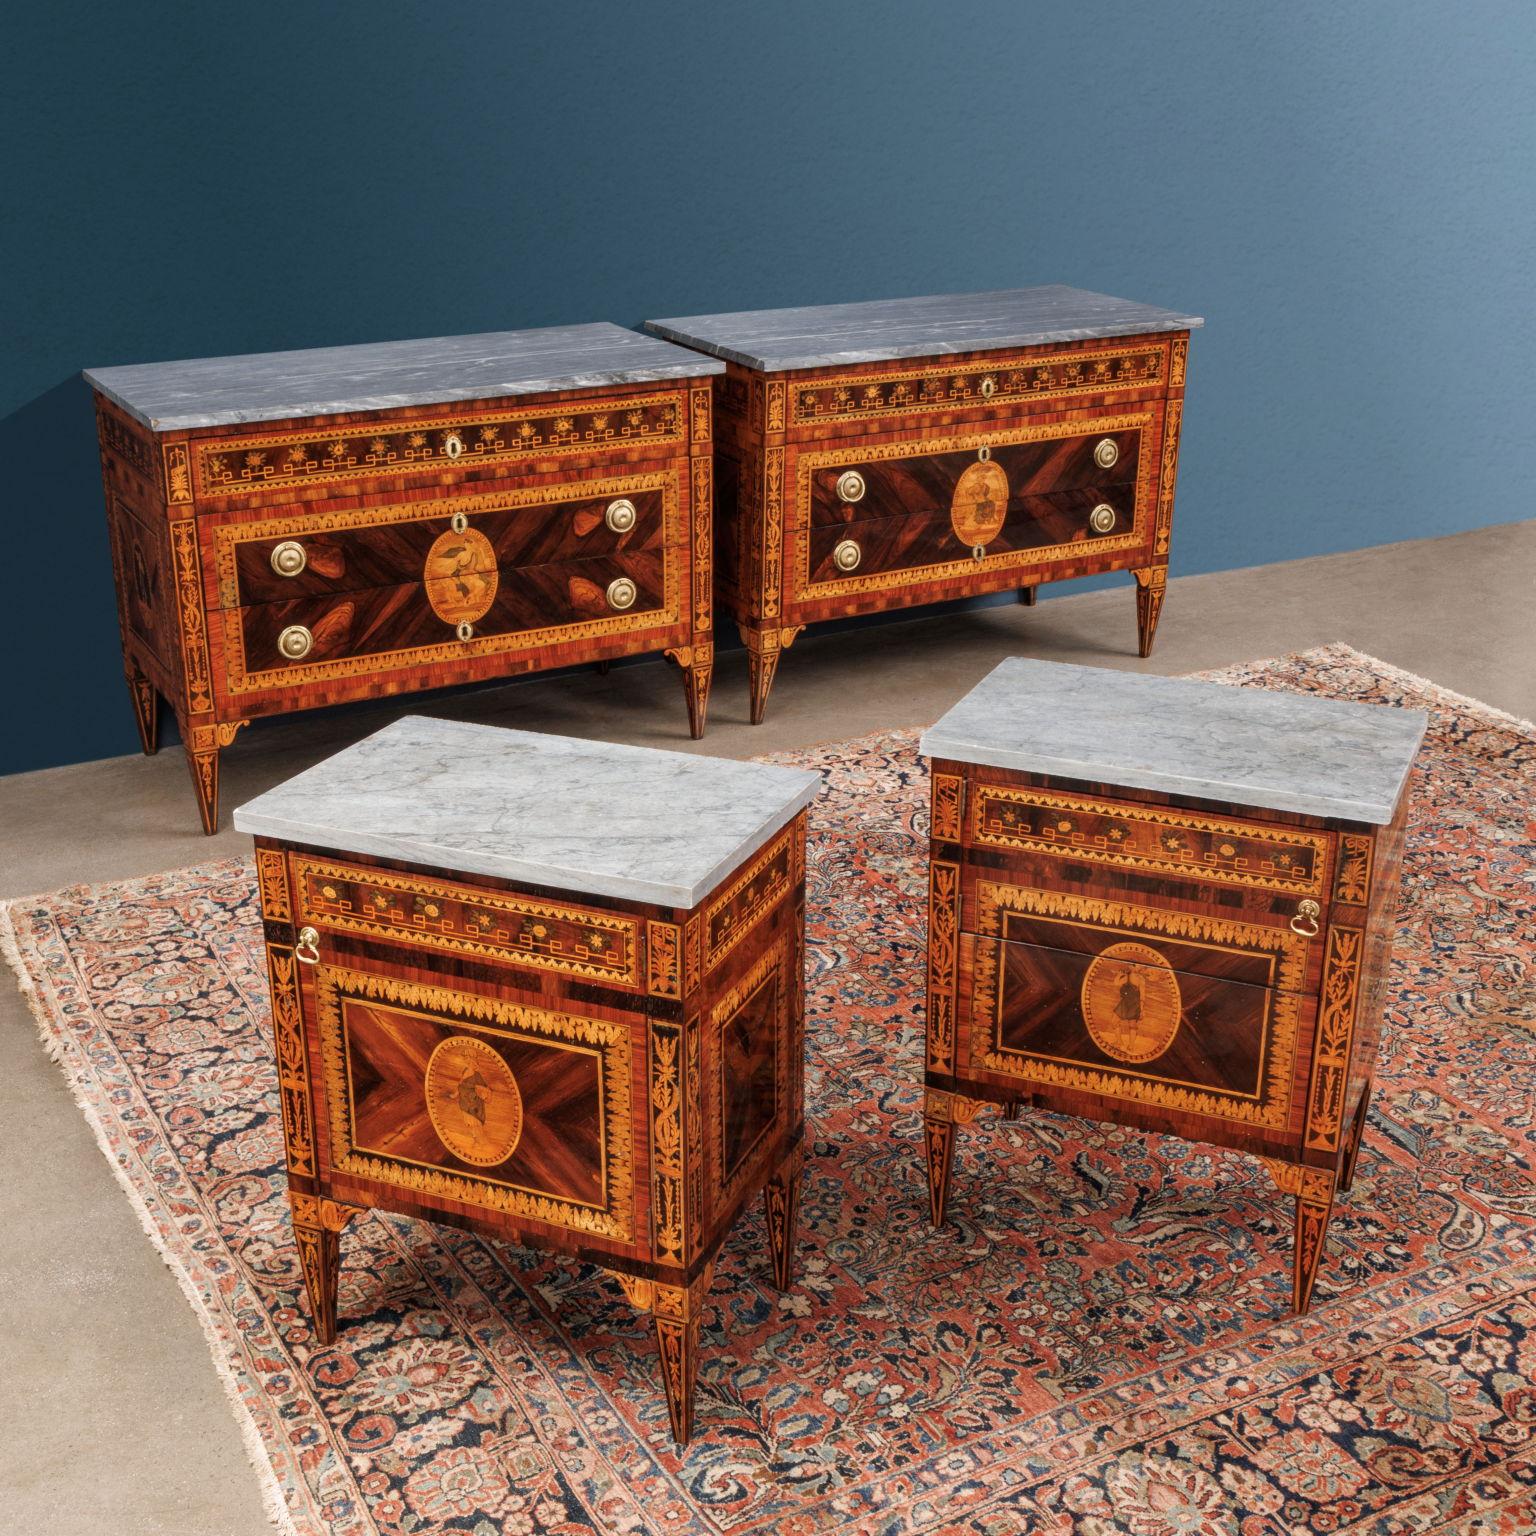 Suite consisting of pair of three-drawer dressers and two door-opening nightstands, one of which has a pull-out compartment; veneered in four-part bois de violette with borders in bois de rose, walnut and with medallion reserves inlaid in maple,